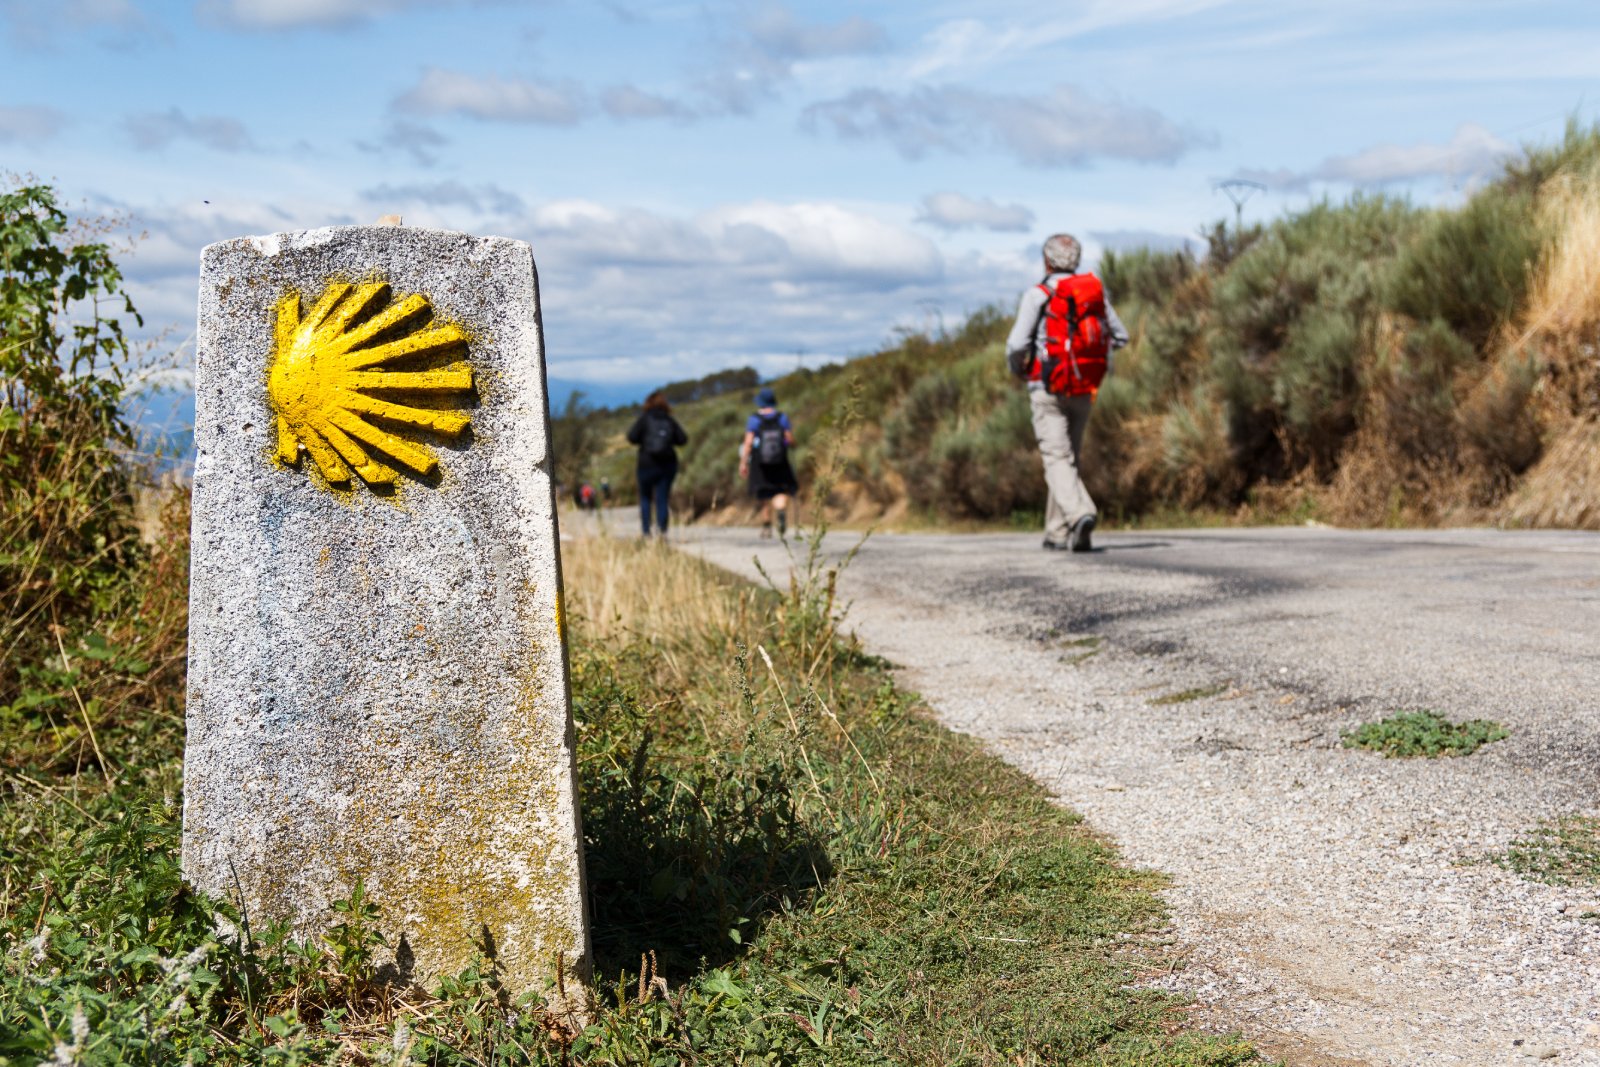 <p class="wp-caption-text">Image Credit: Shutterstock / gregorioa</p>  <p><span>The Camino de Santiago comprises several routes, each with its own unique character and challenges. The most popular is the Camino Francés, which stretches approximately 800 kilometers from Saint-Jean-Pied-de-Port in France to Santiago de Compostela in Spain. Other notable routes include the Camino Portugués, the Camino del Norte, and the Camino Primitivo. Regardless of the chosen path, pilgrims (or “peregrinos”) can expect a journey that weaves through varied landscapes, from bustling cities and quaint villages to serene forests and rugged coastlines.</span></p>